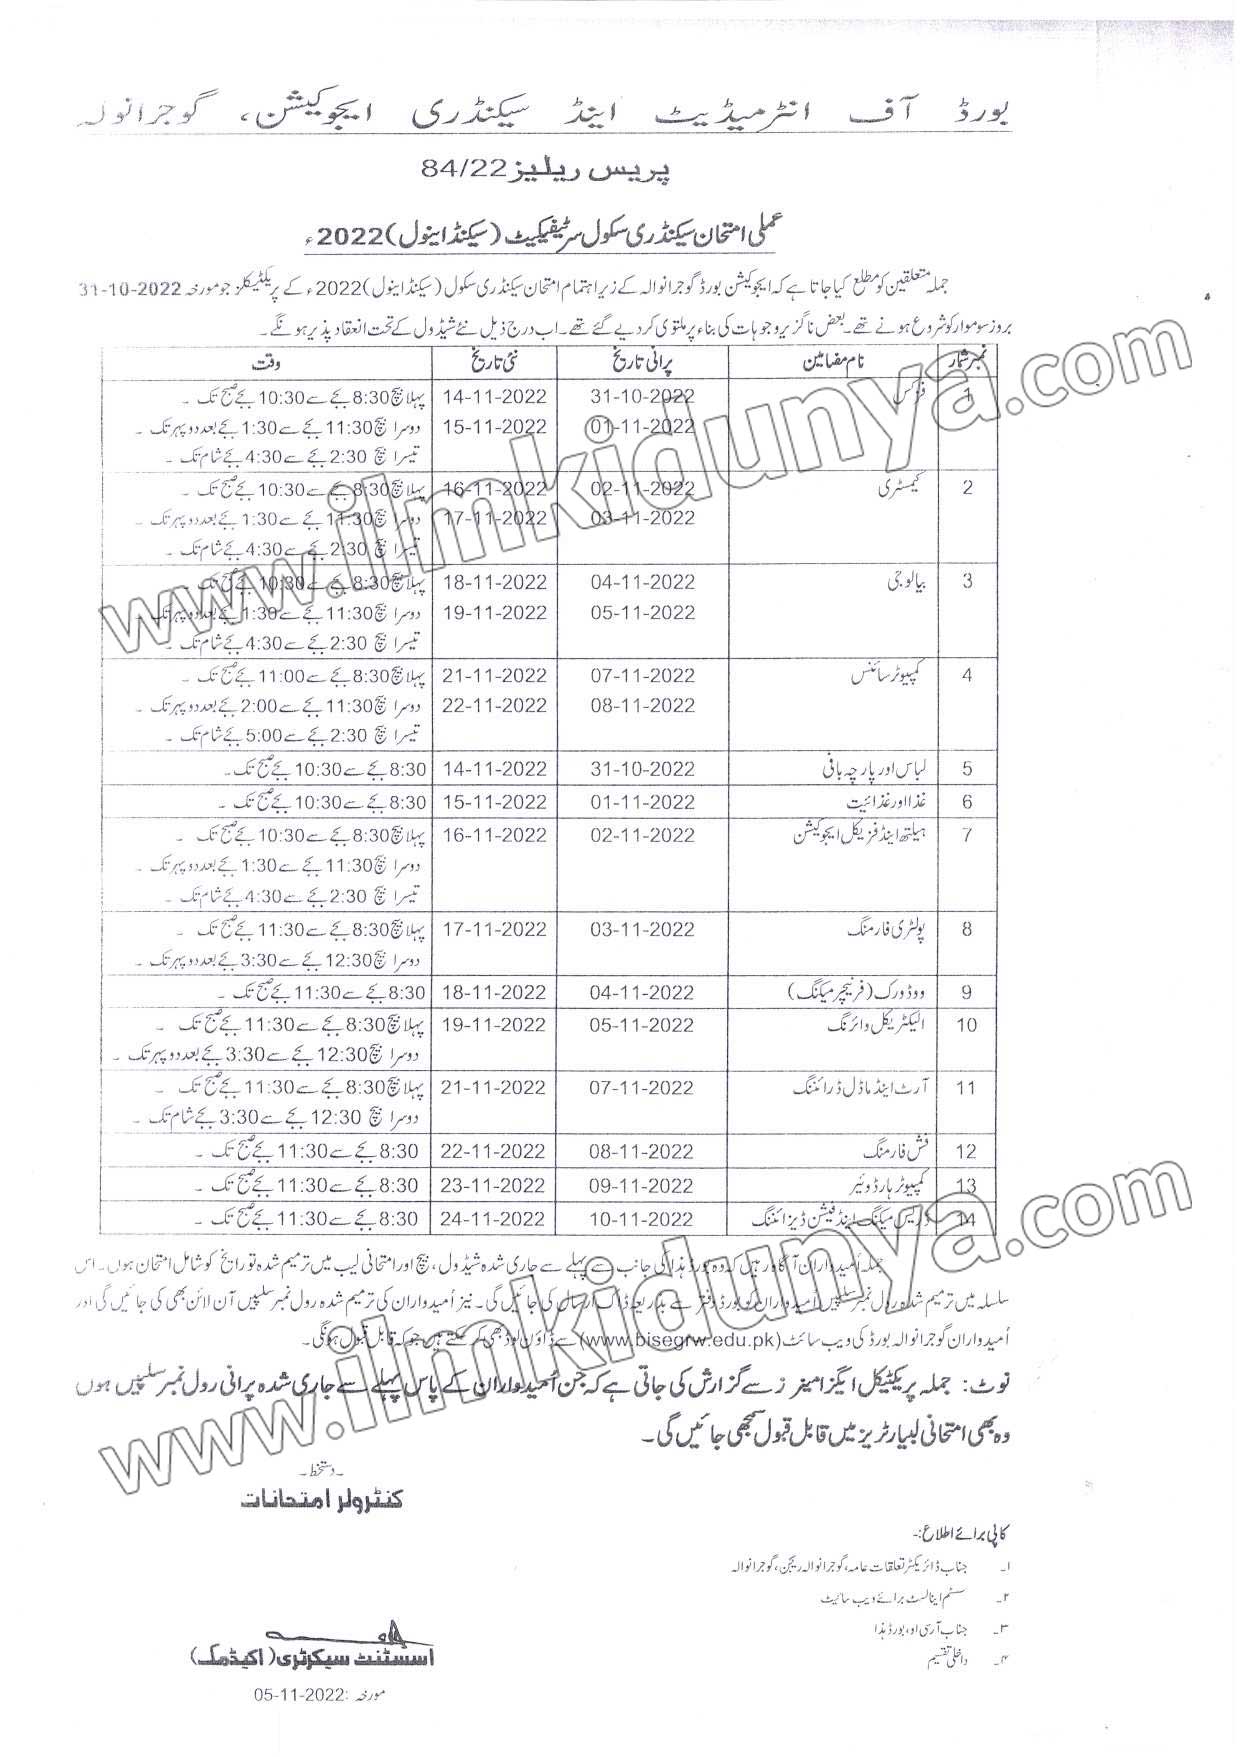 Revised SSC practical date sheet 2nd annual 2022